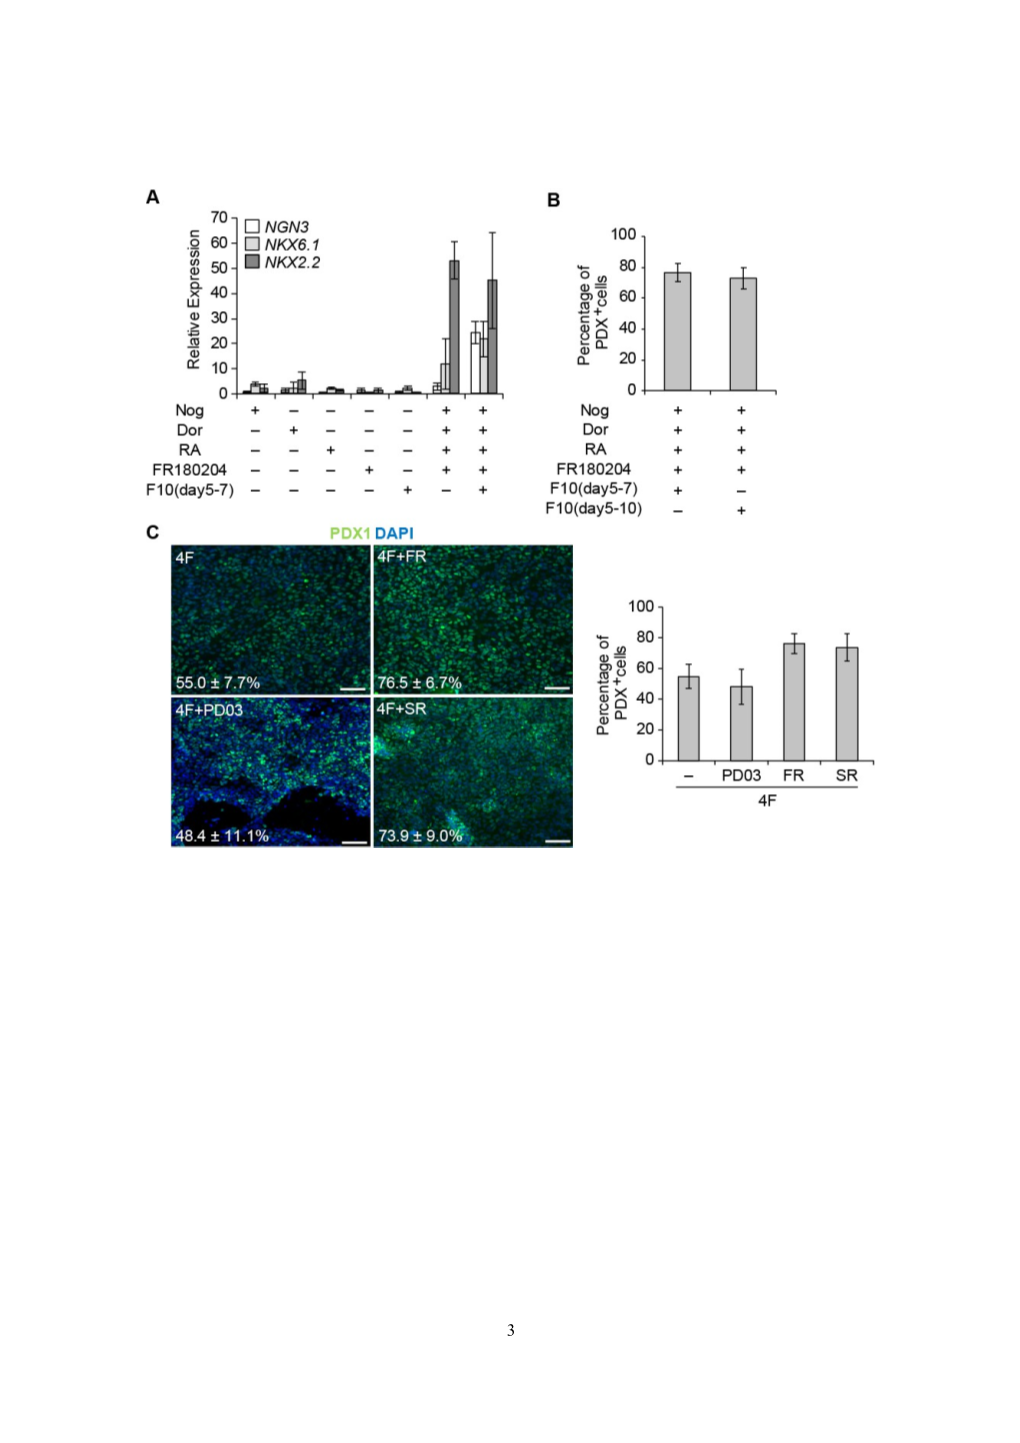 Endodermal Differentiation of Human Pluripotent Stem Cells to Insulin-Producing Cells